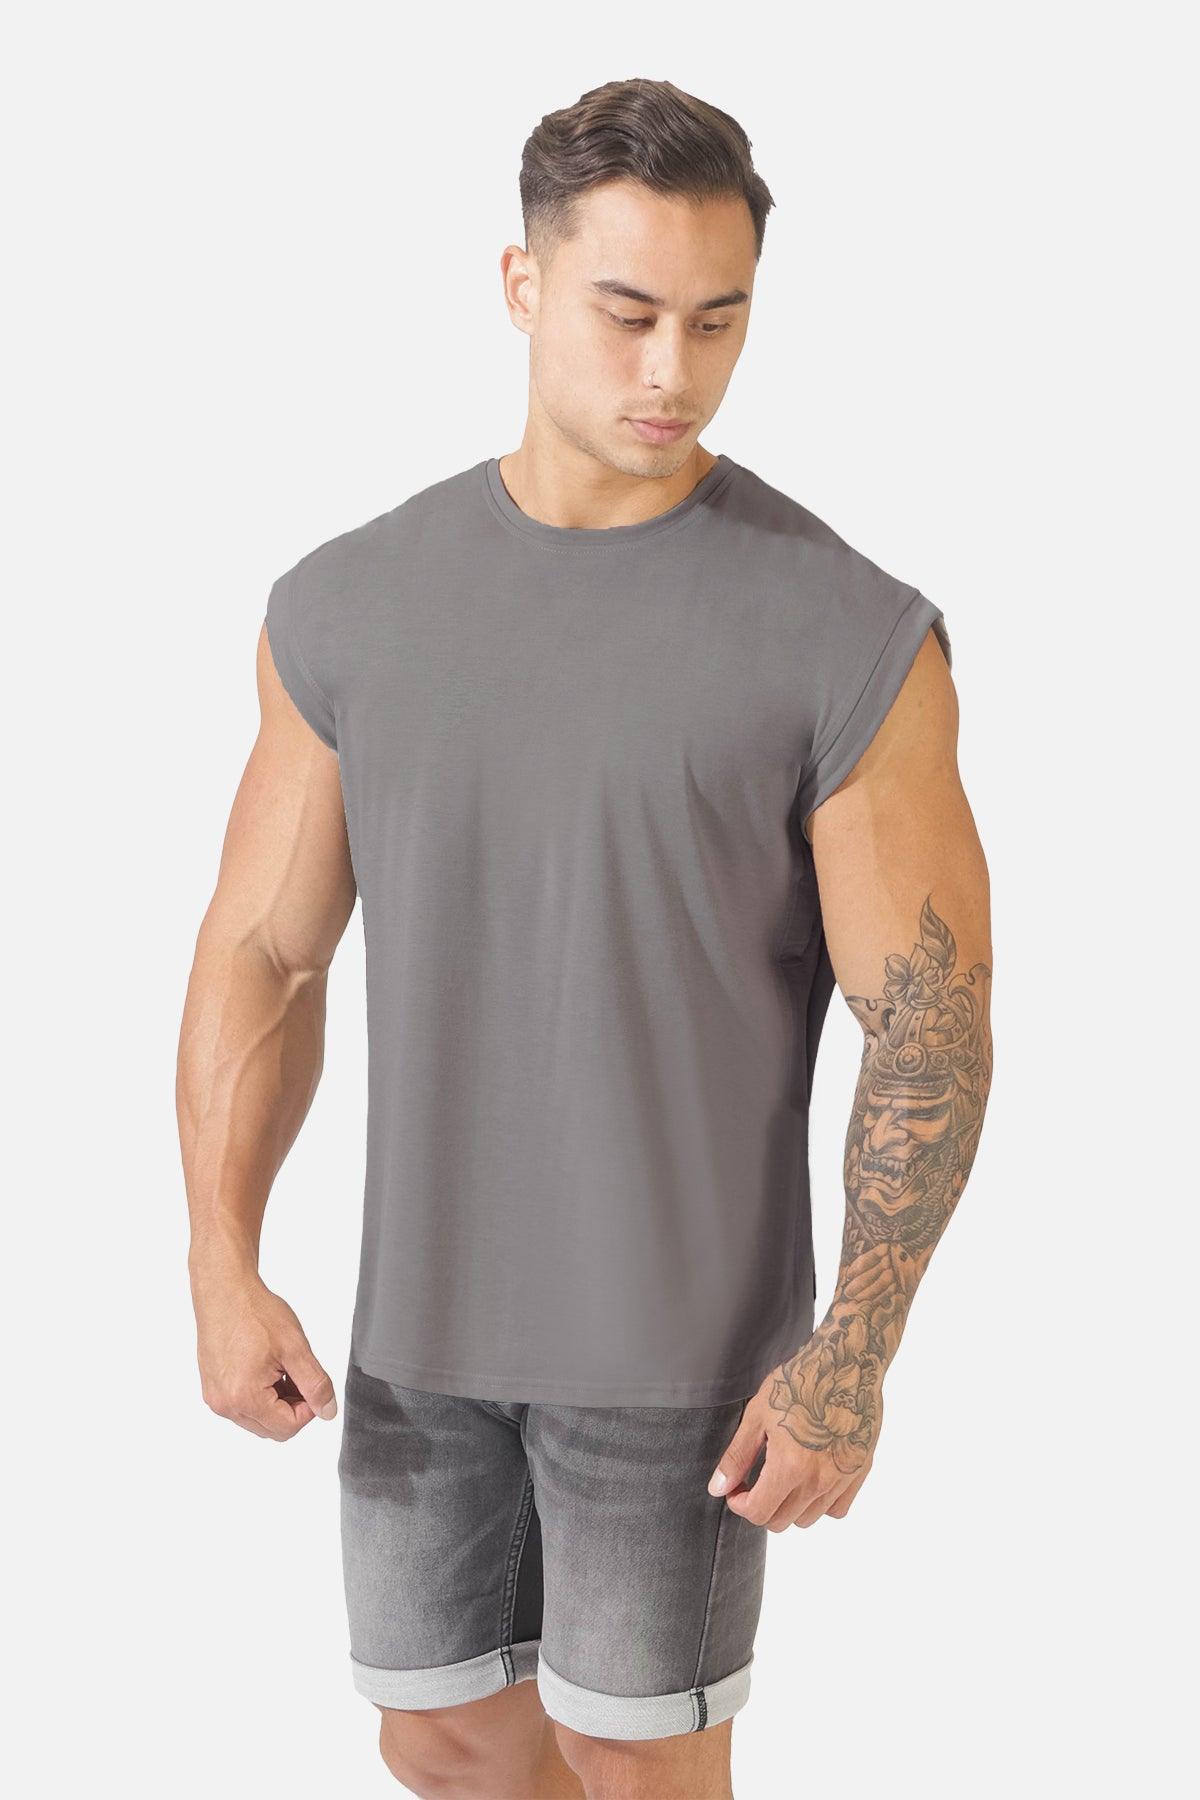 Capped Sleeve Muscle Tee - Light Gray